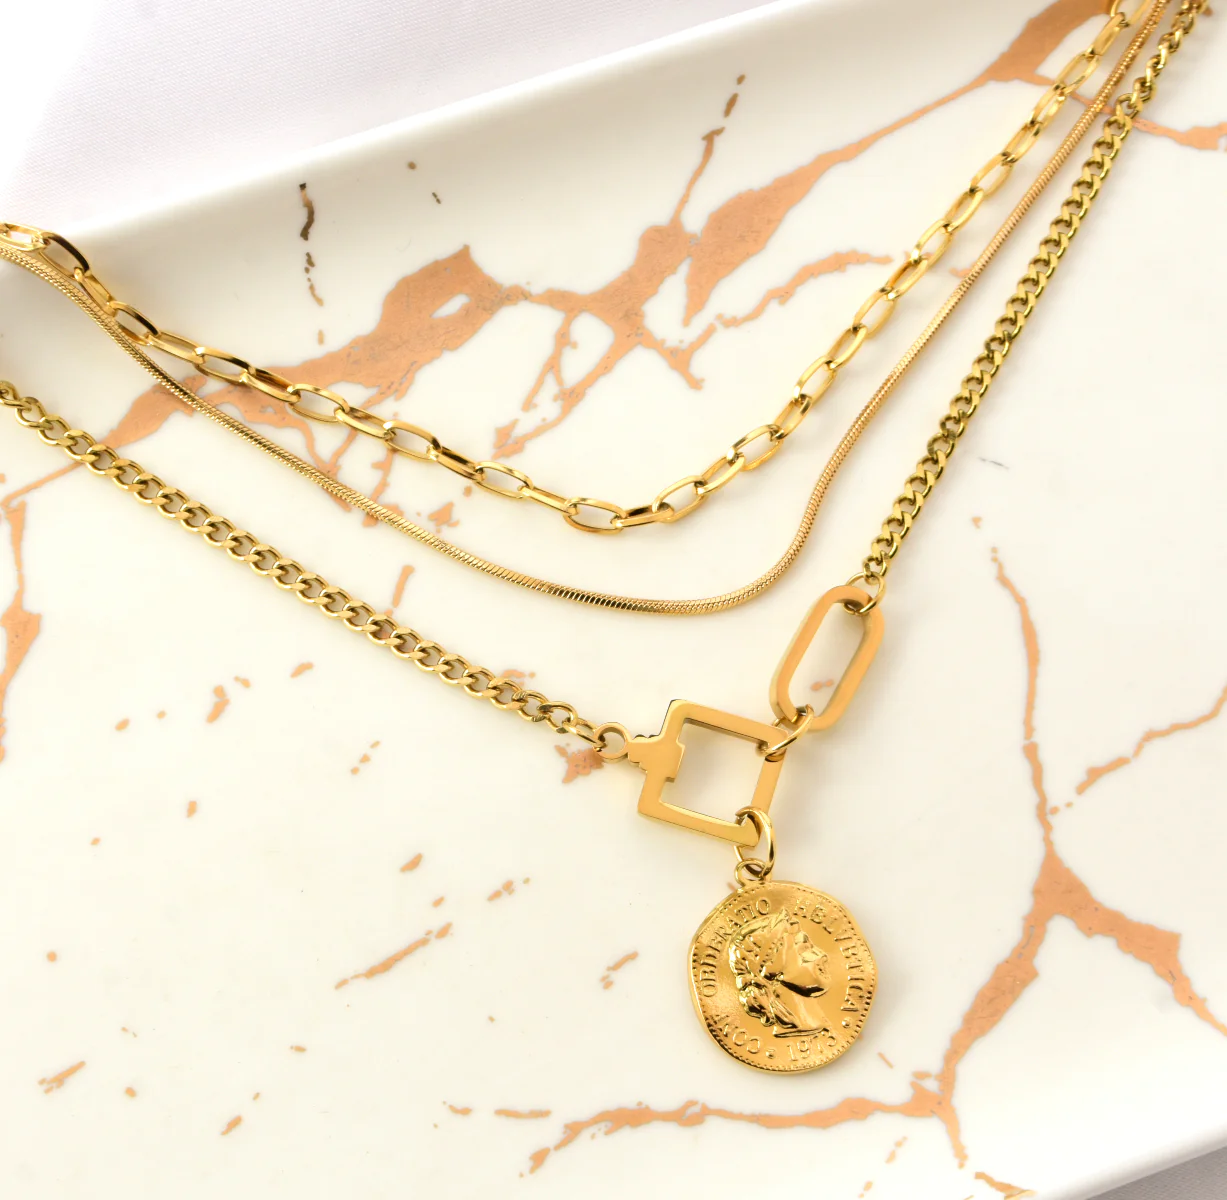 The Lily Layered Steel Necklace in Gold - SpiritedBoutiques Boho Hippie Boutique Style Necklace, Modern Opus